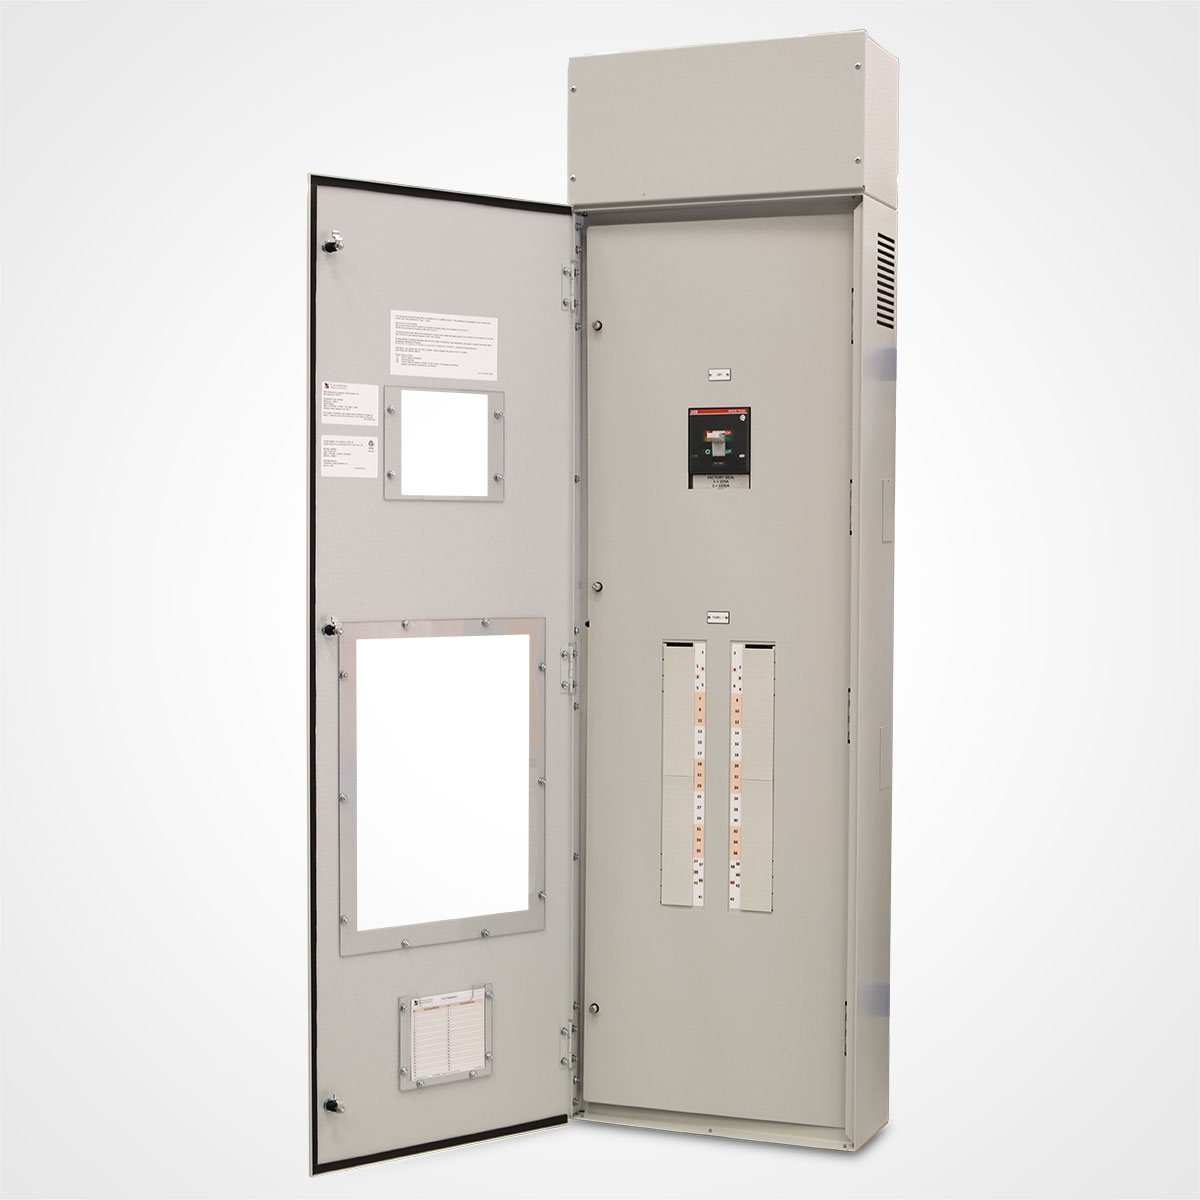 The LayerZero Series 70: ePanel-1 with Outer Door Open.